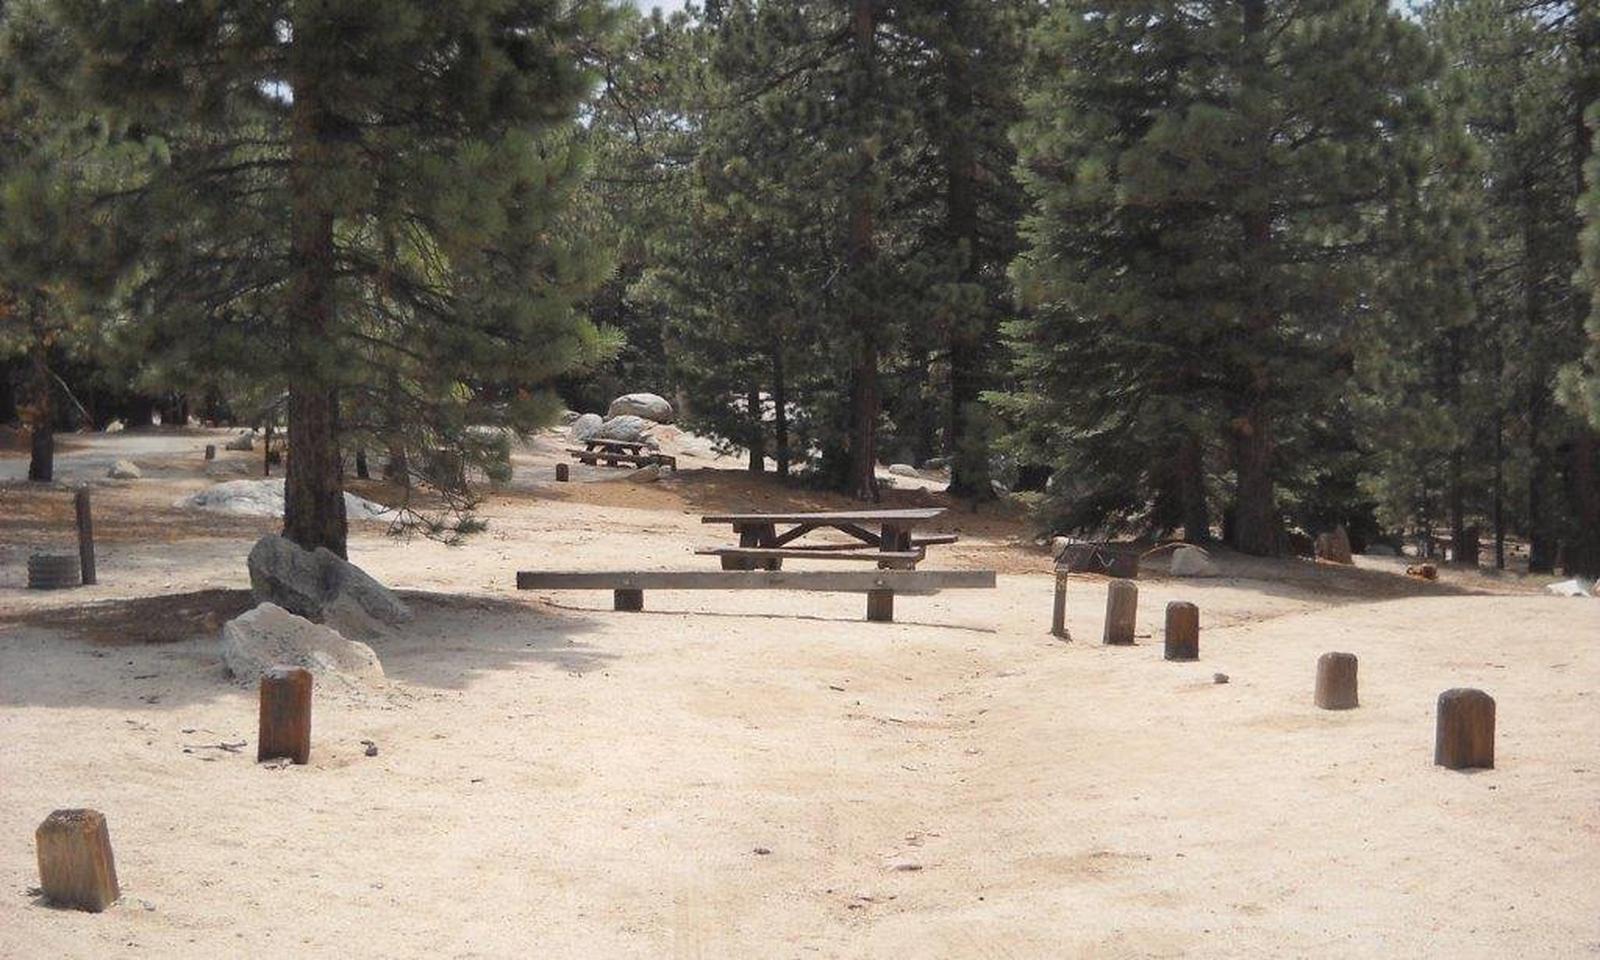 Boulder Basin campsite 29 with picnic table, fire pit, and parking area.